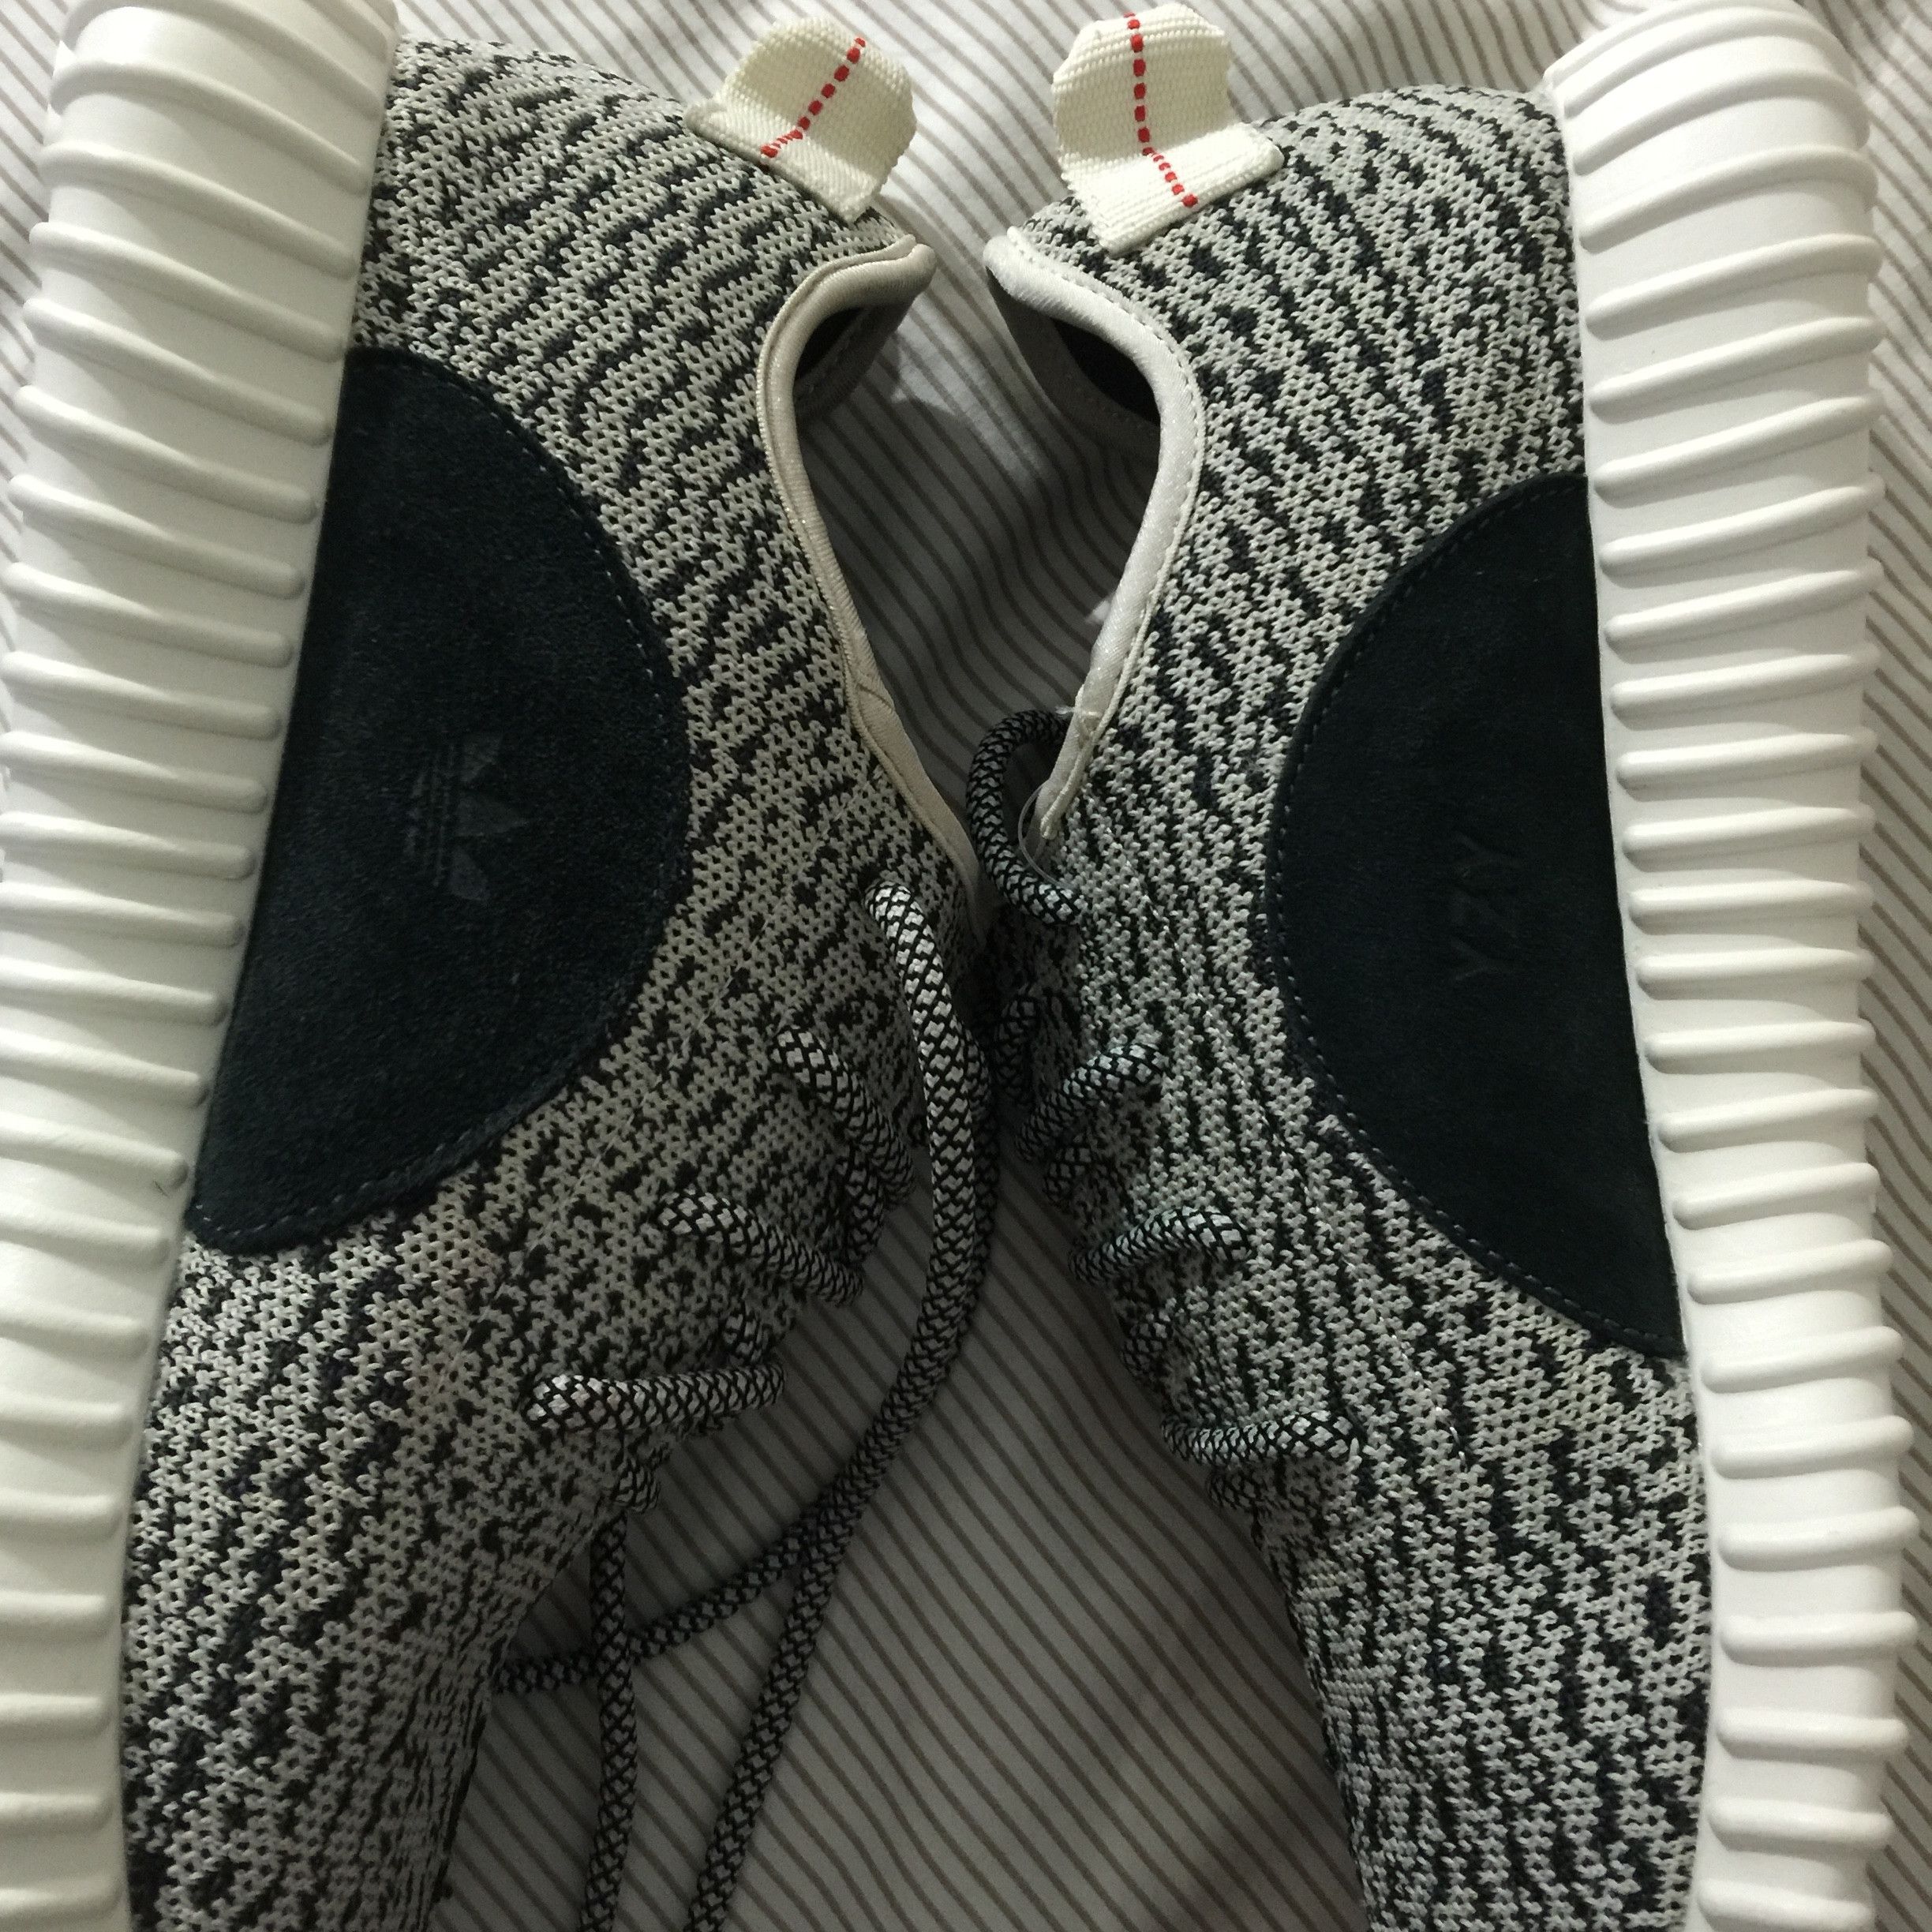 Adidas Yeezy 350 Boost Size US 10 / EU 43 - 7 Preview